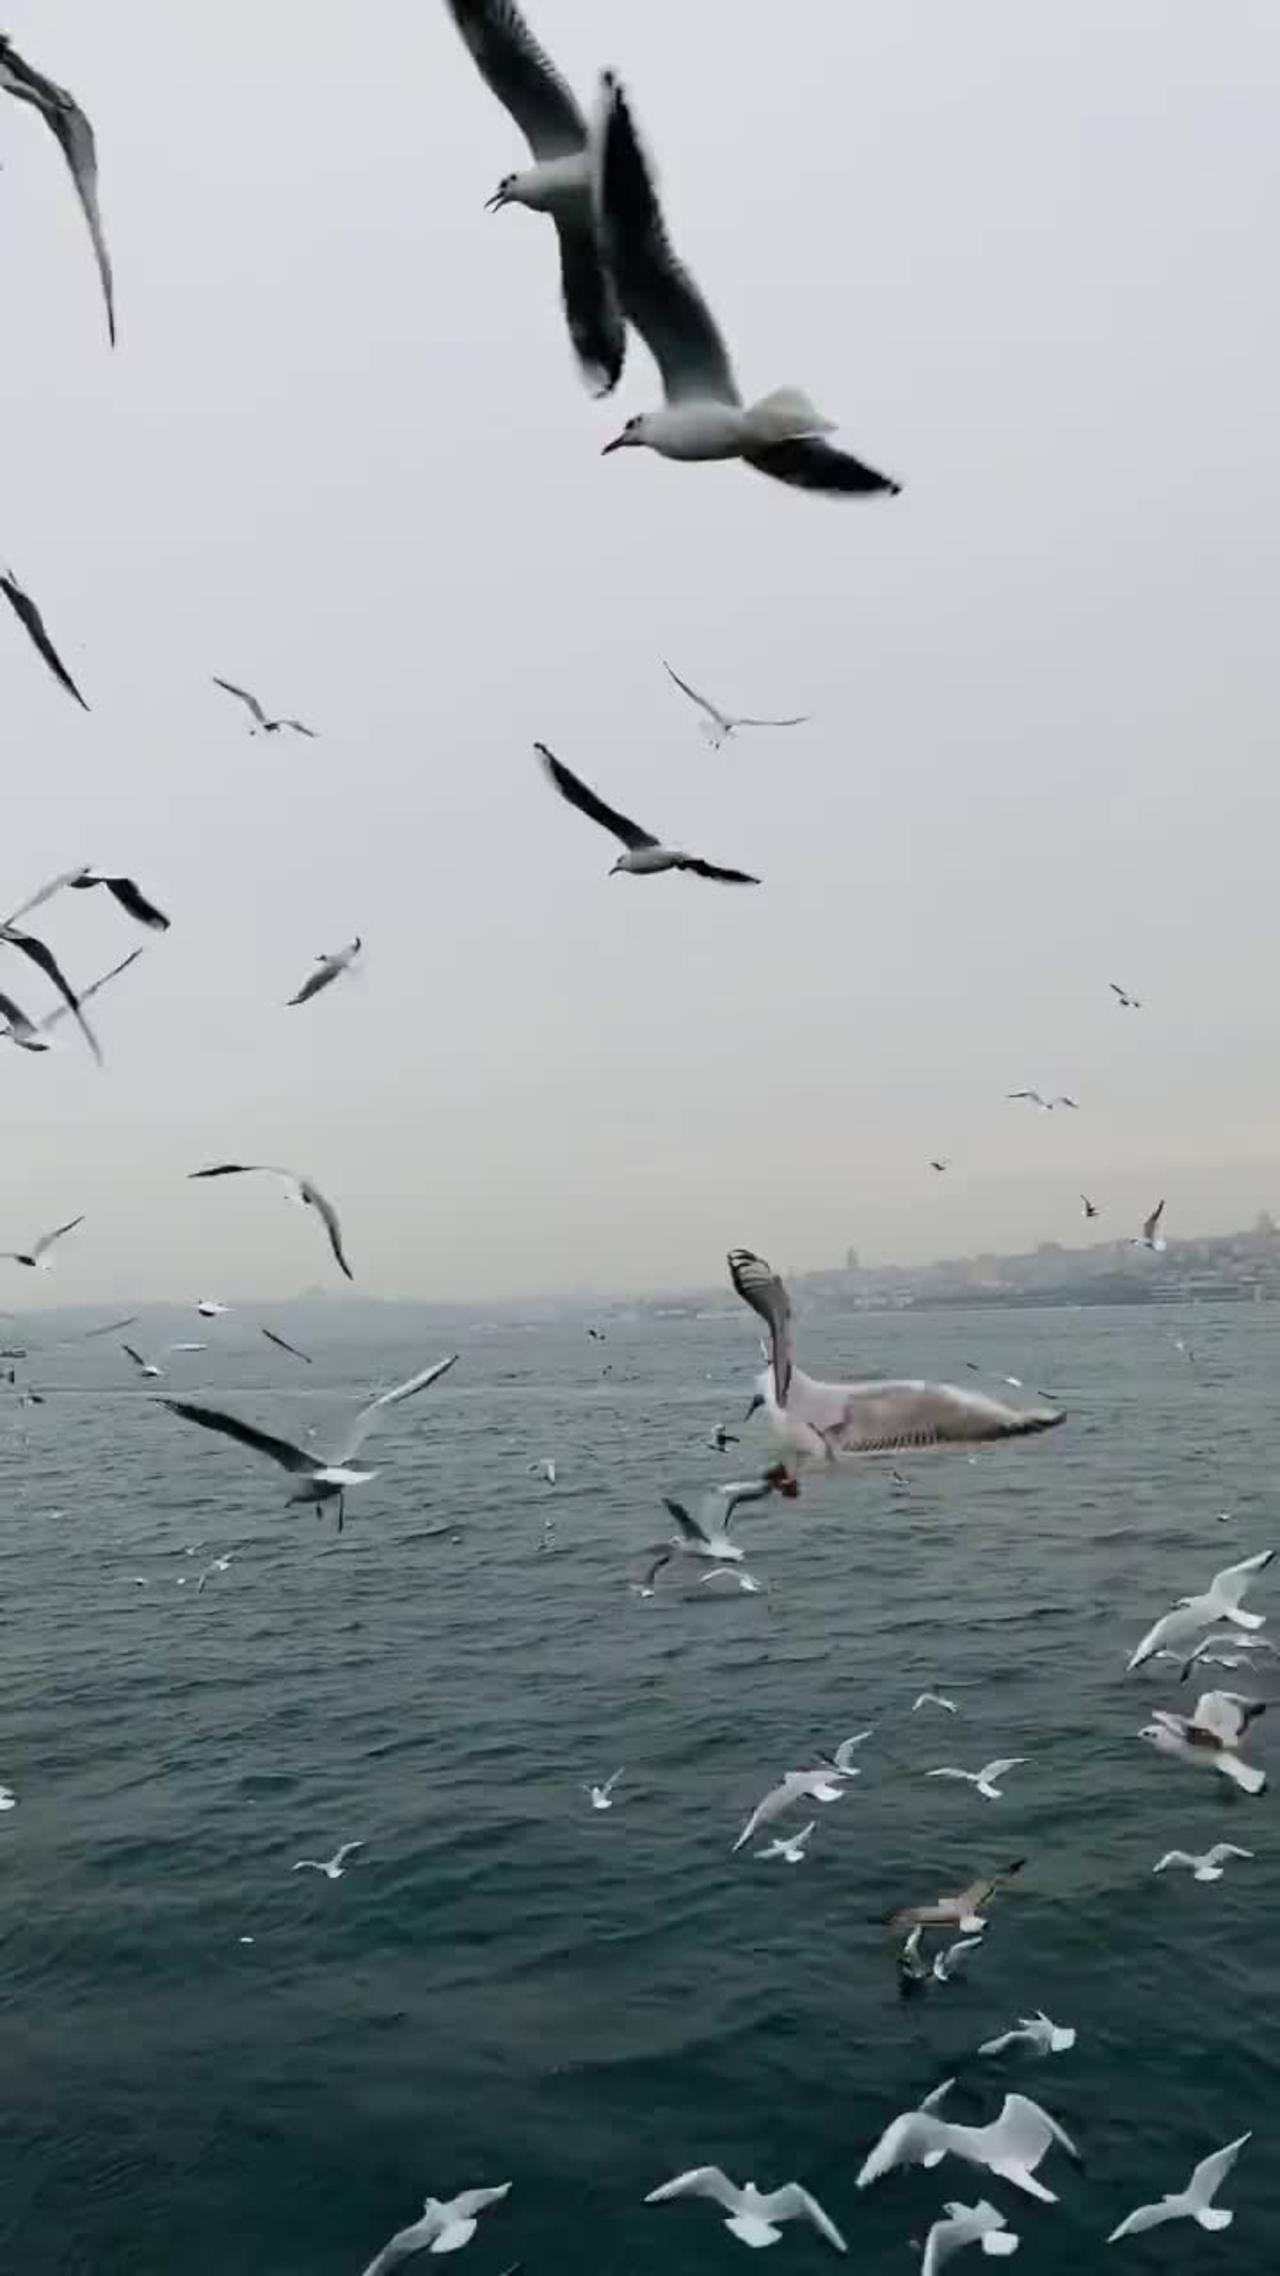 How Beautiful Birds are flying over the see?